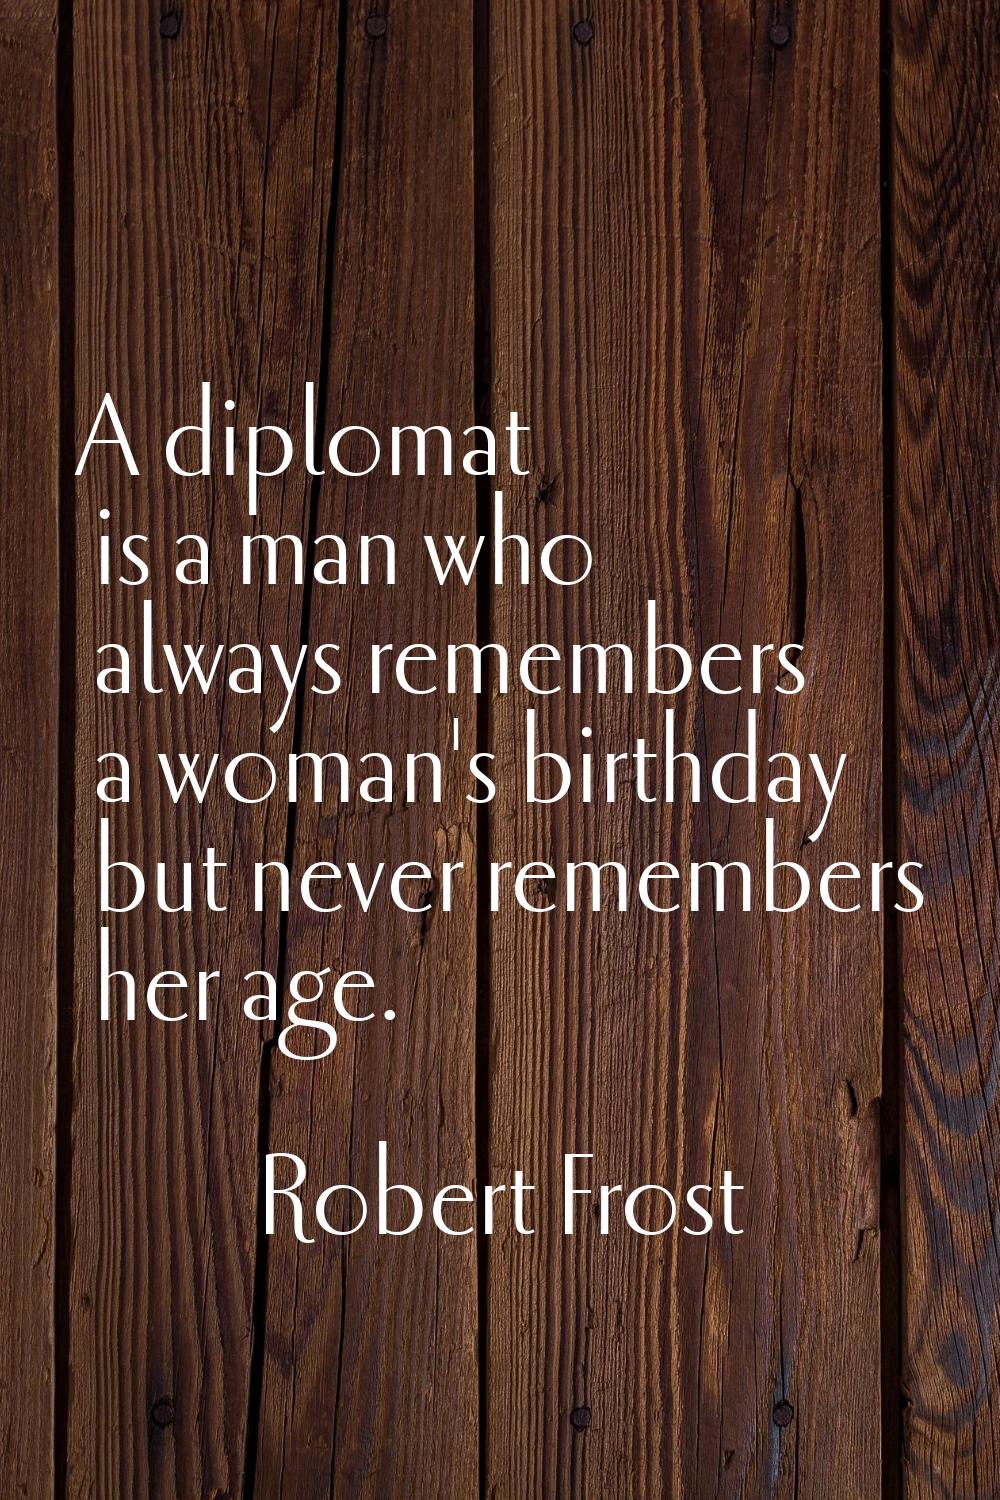 A diplomat is a man who always remembers a woman's birthday but never remembers her age.